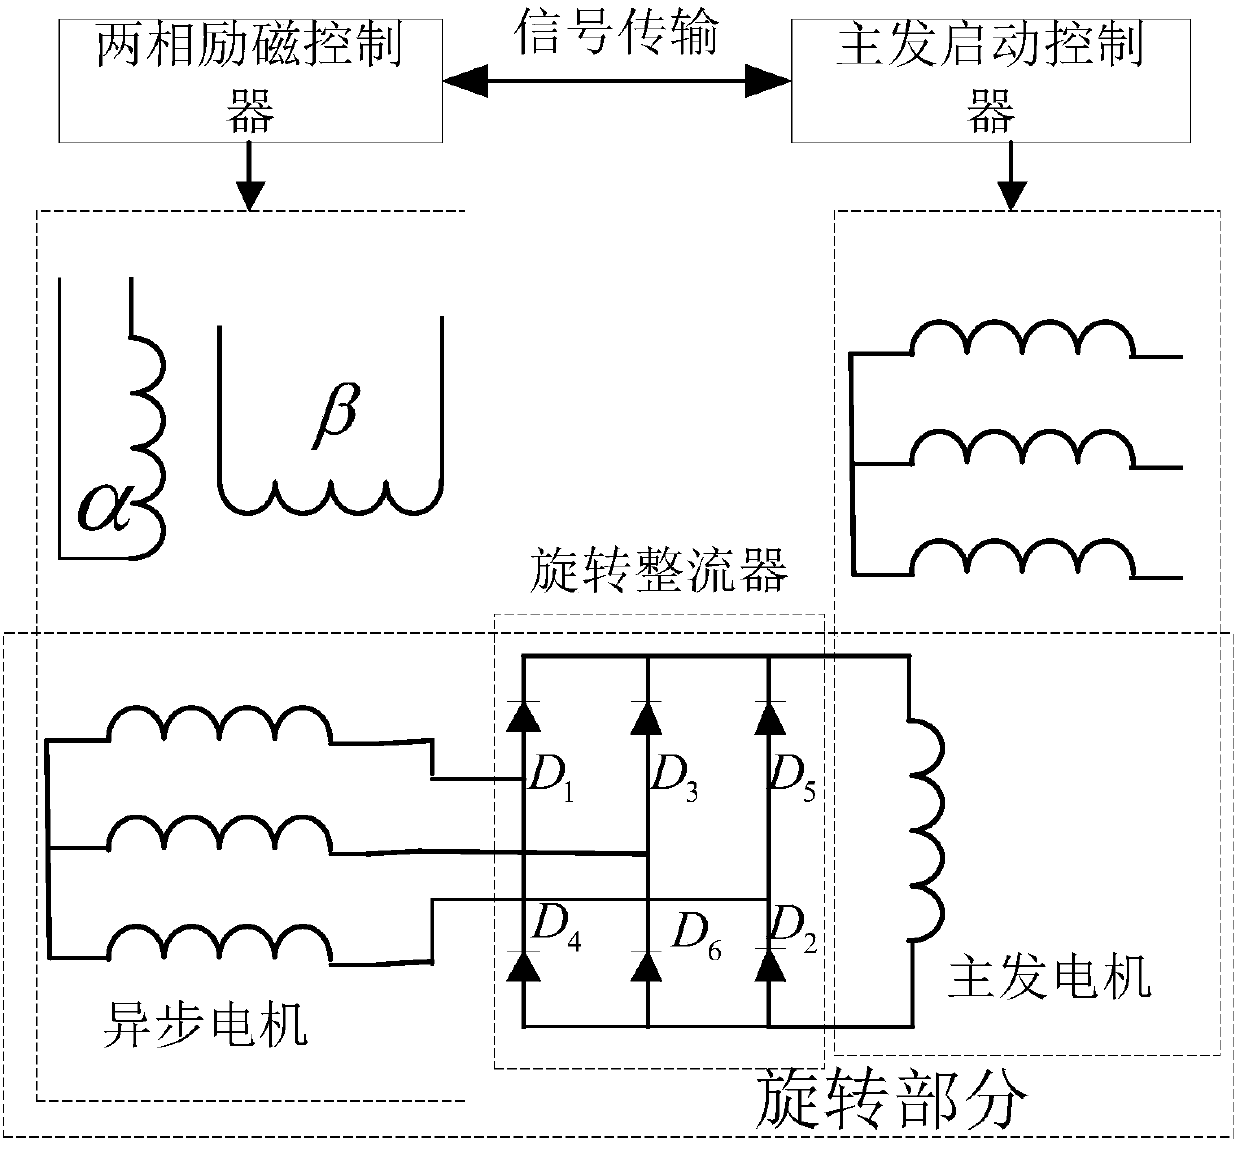 Fault detection and positioning method for rotary rectifier of aeronautical brushless electric excitation synchronous motor